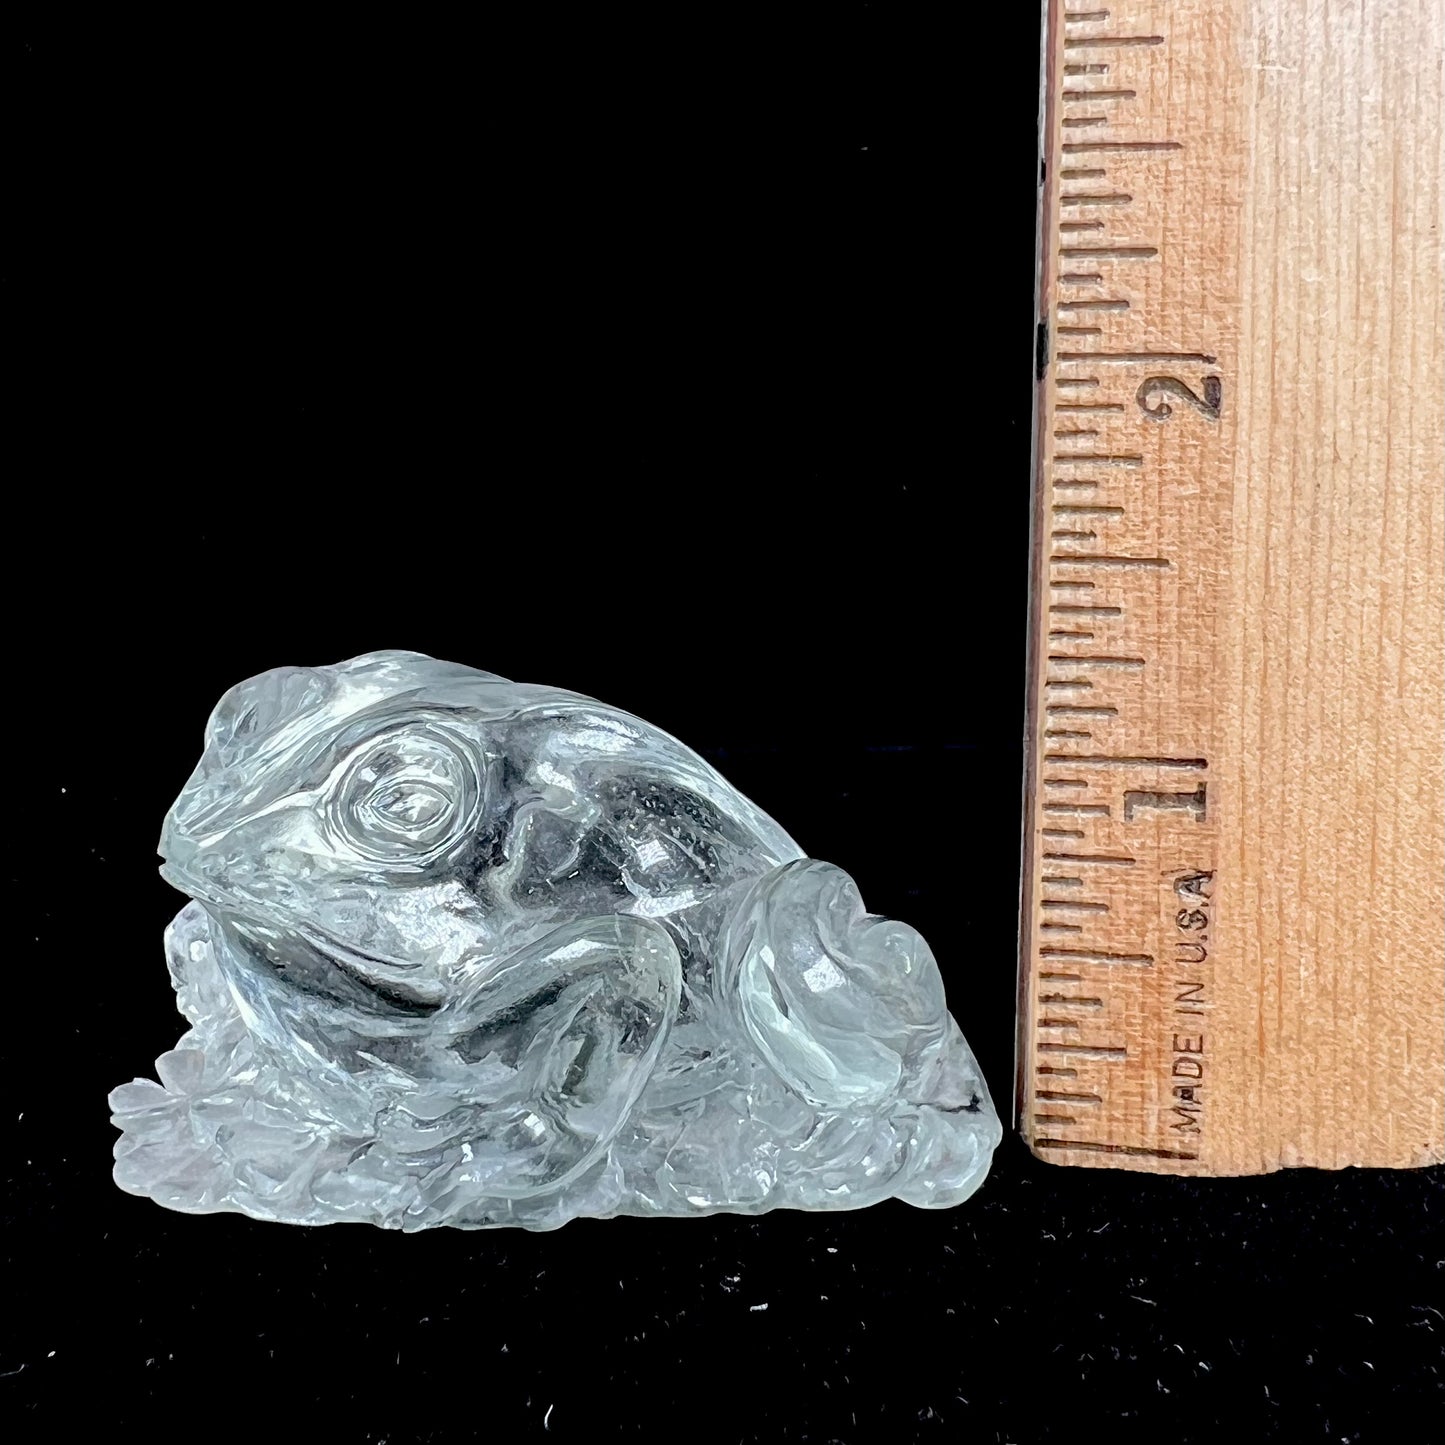 A crystal frog carved from topaz by artist Ronald Stevens.